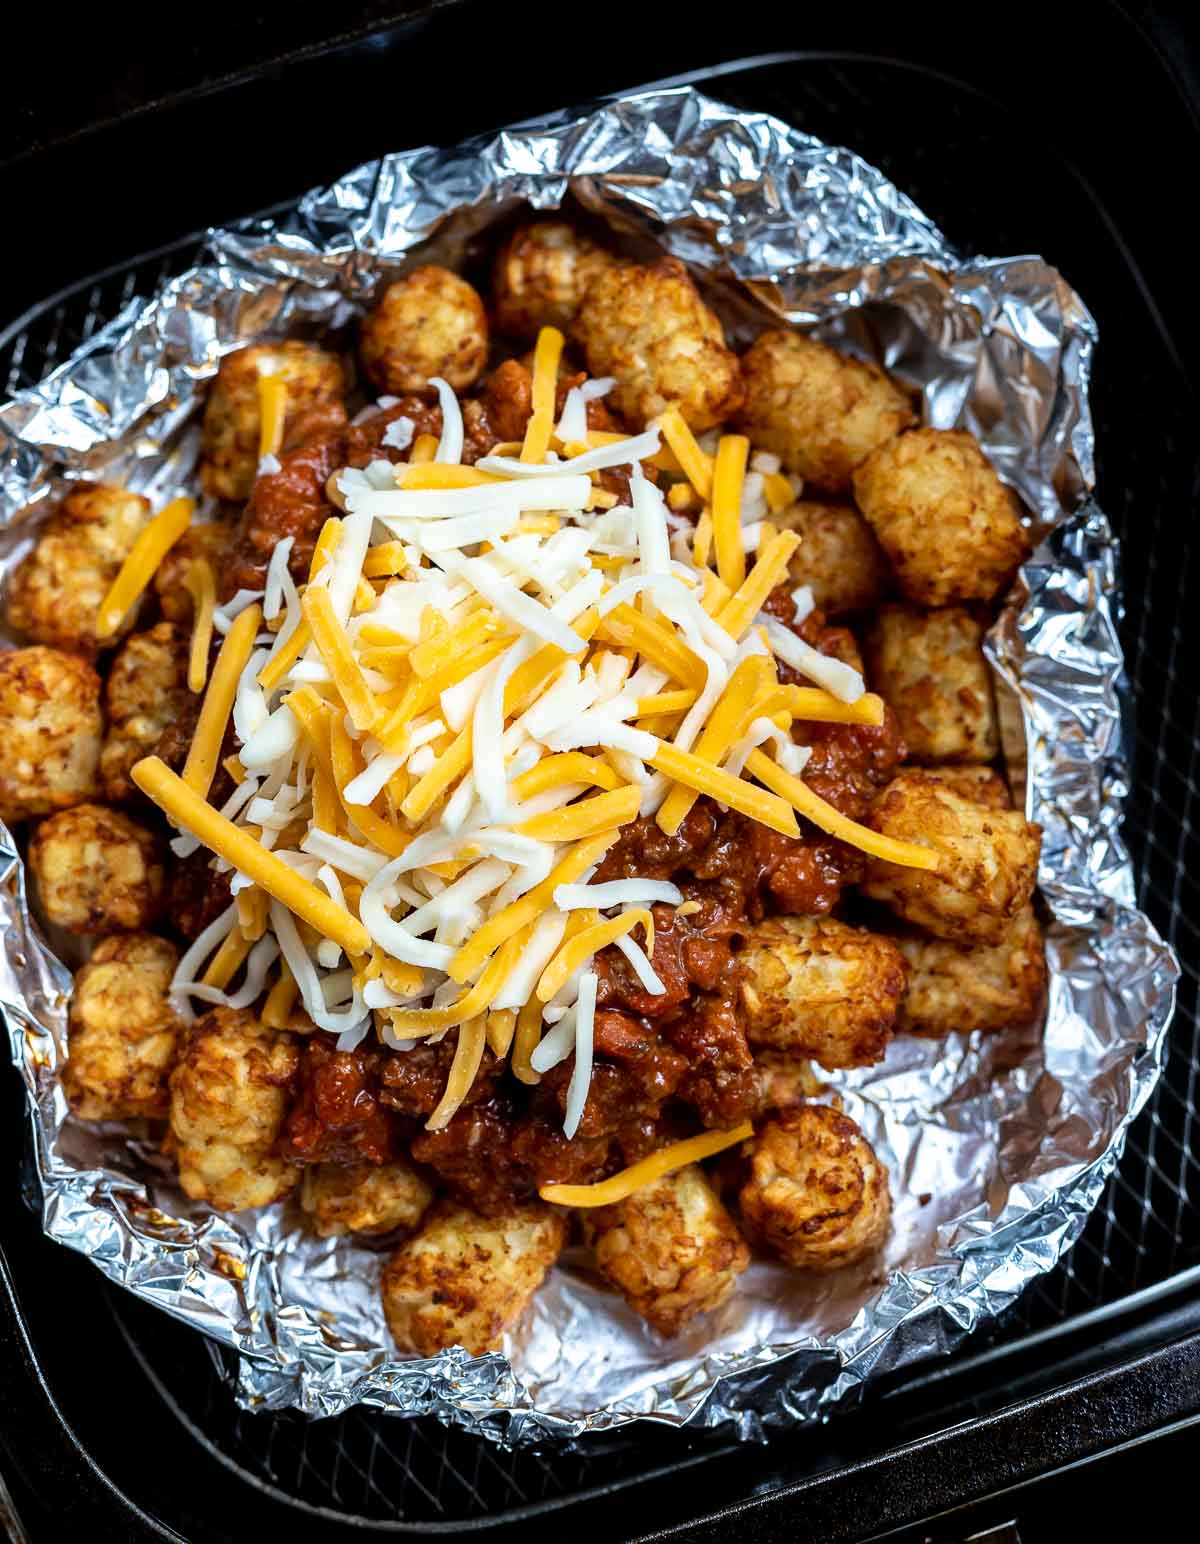 tater tots topped with chili and shredded cheese in air fryer basket